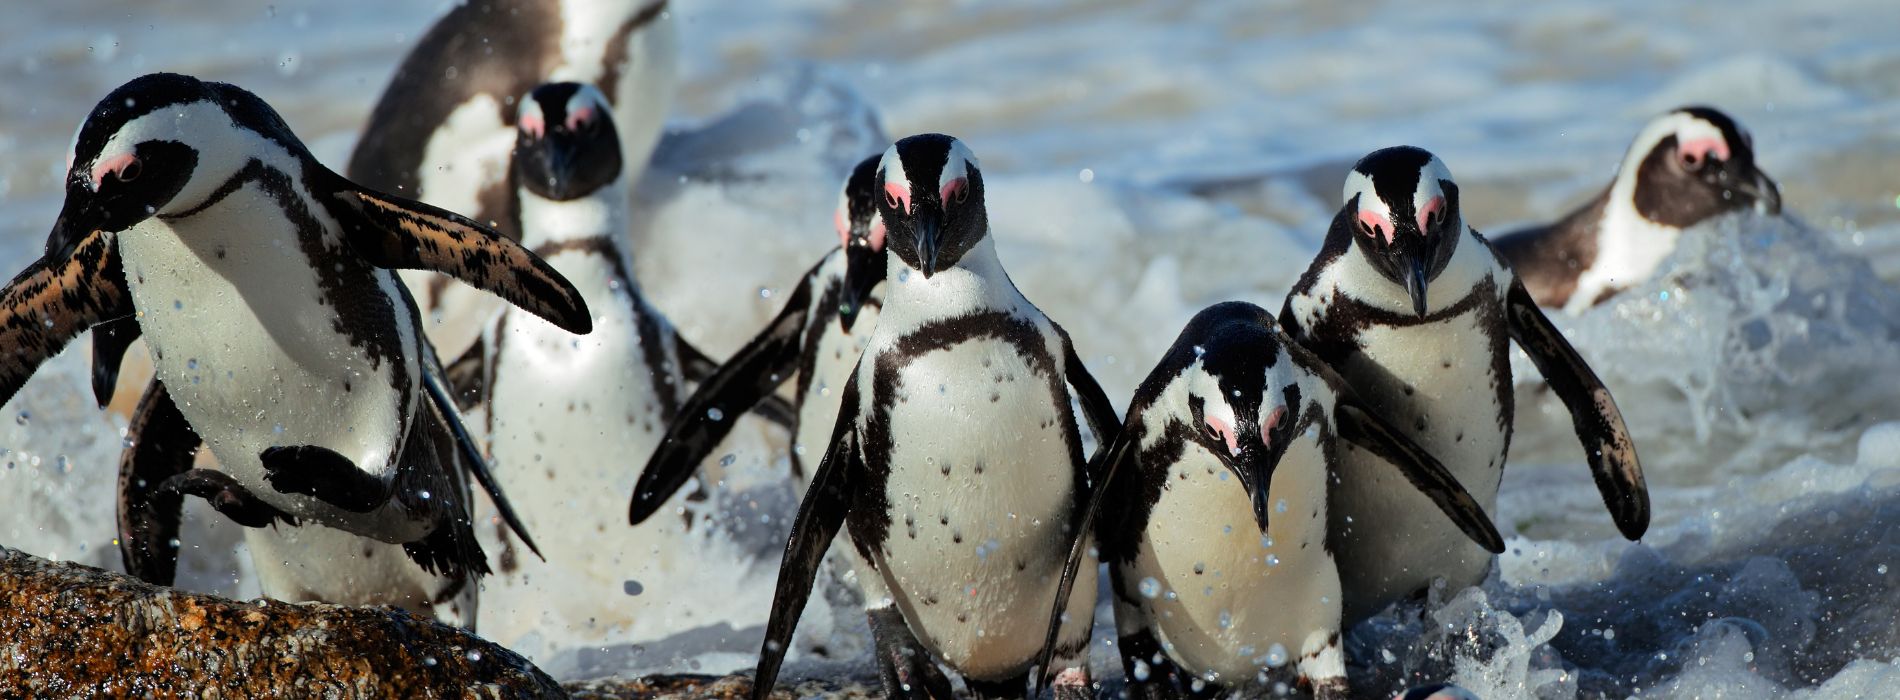 African Penguin Biography: A Playful Journey with Spheniscus demersus